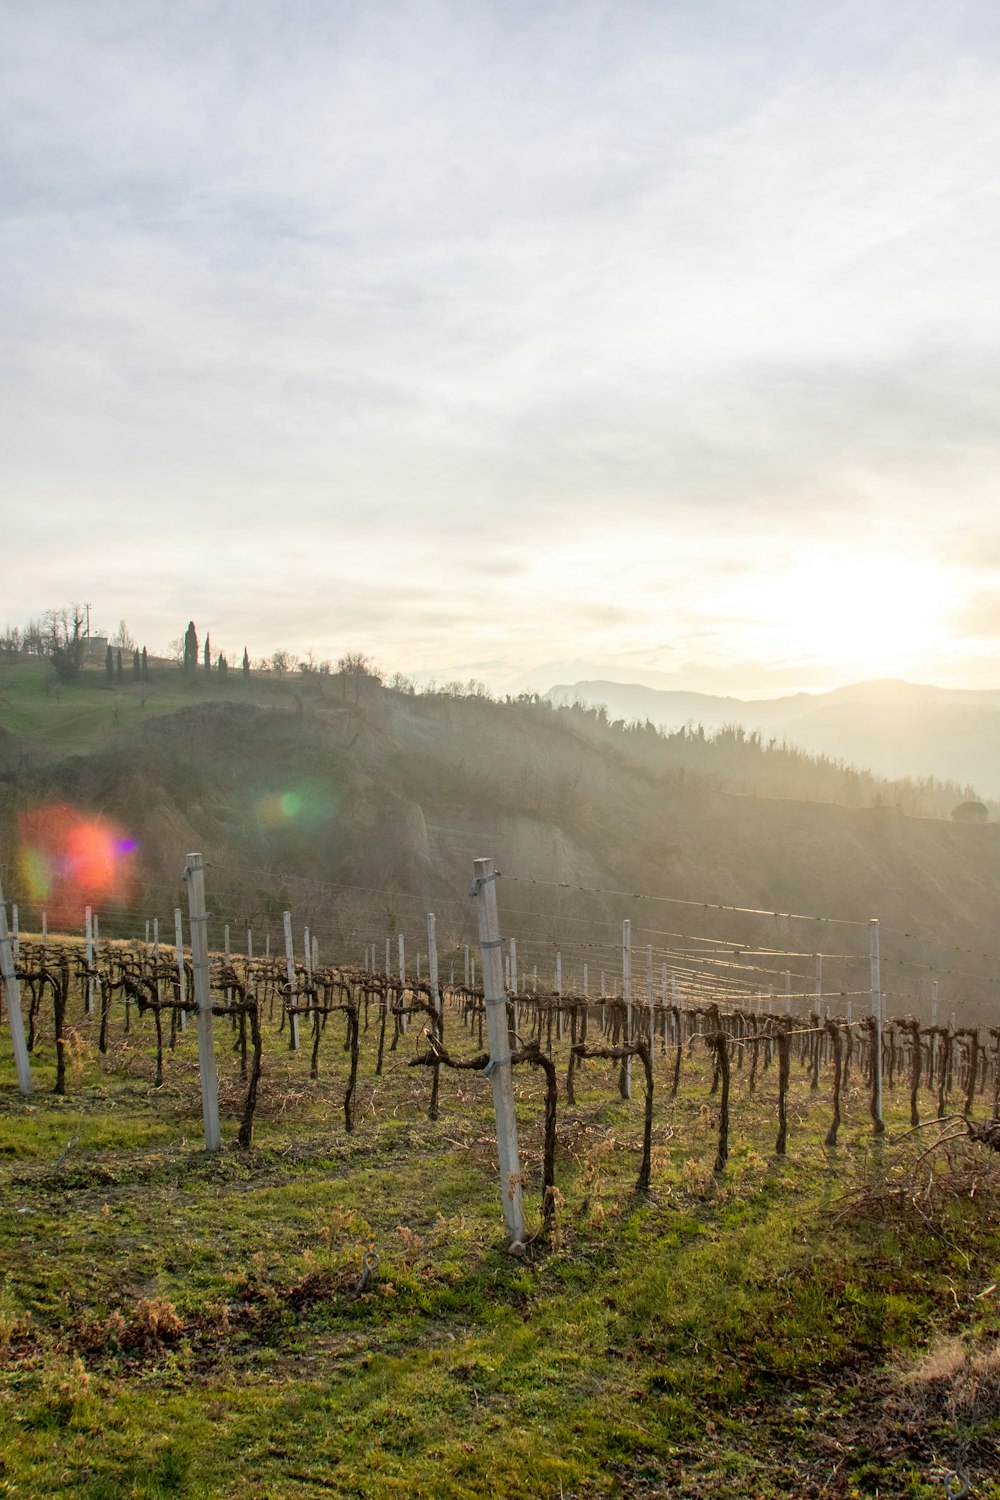 the sun is setting over a vineyard in the hills